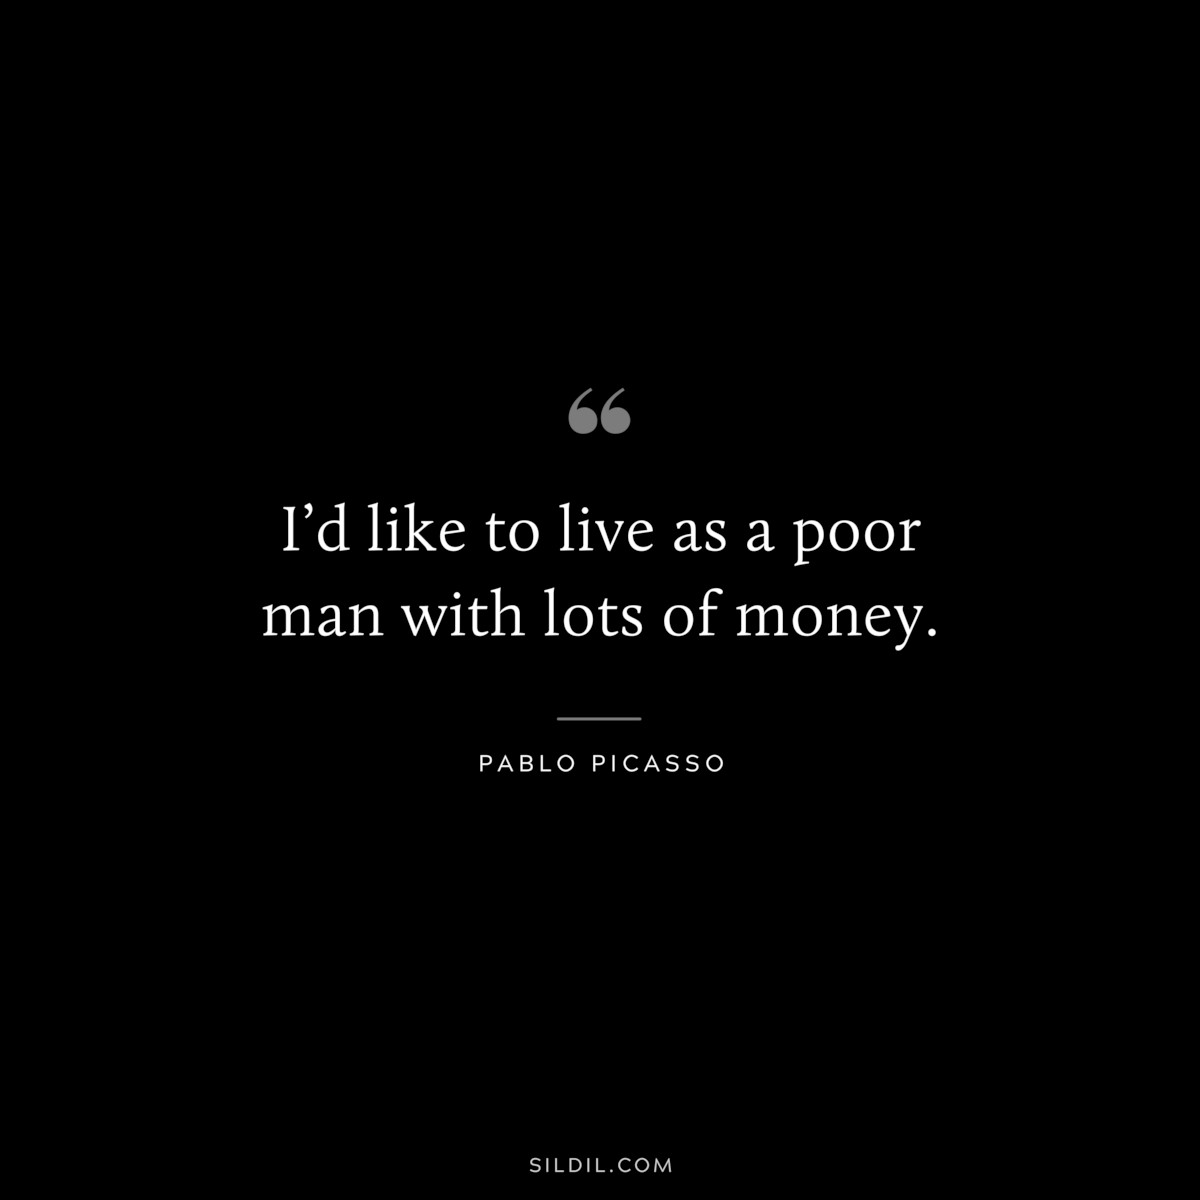 I’d like to live as a poor man with lots of money. ― Pablo Picasso